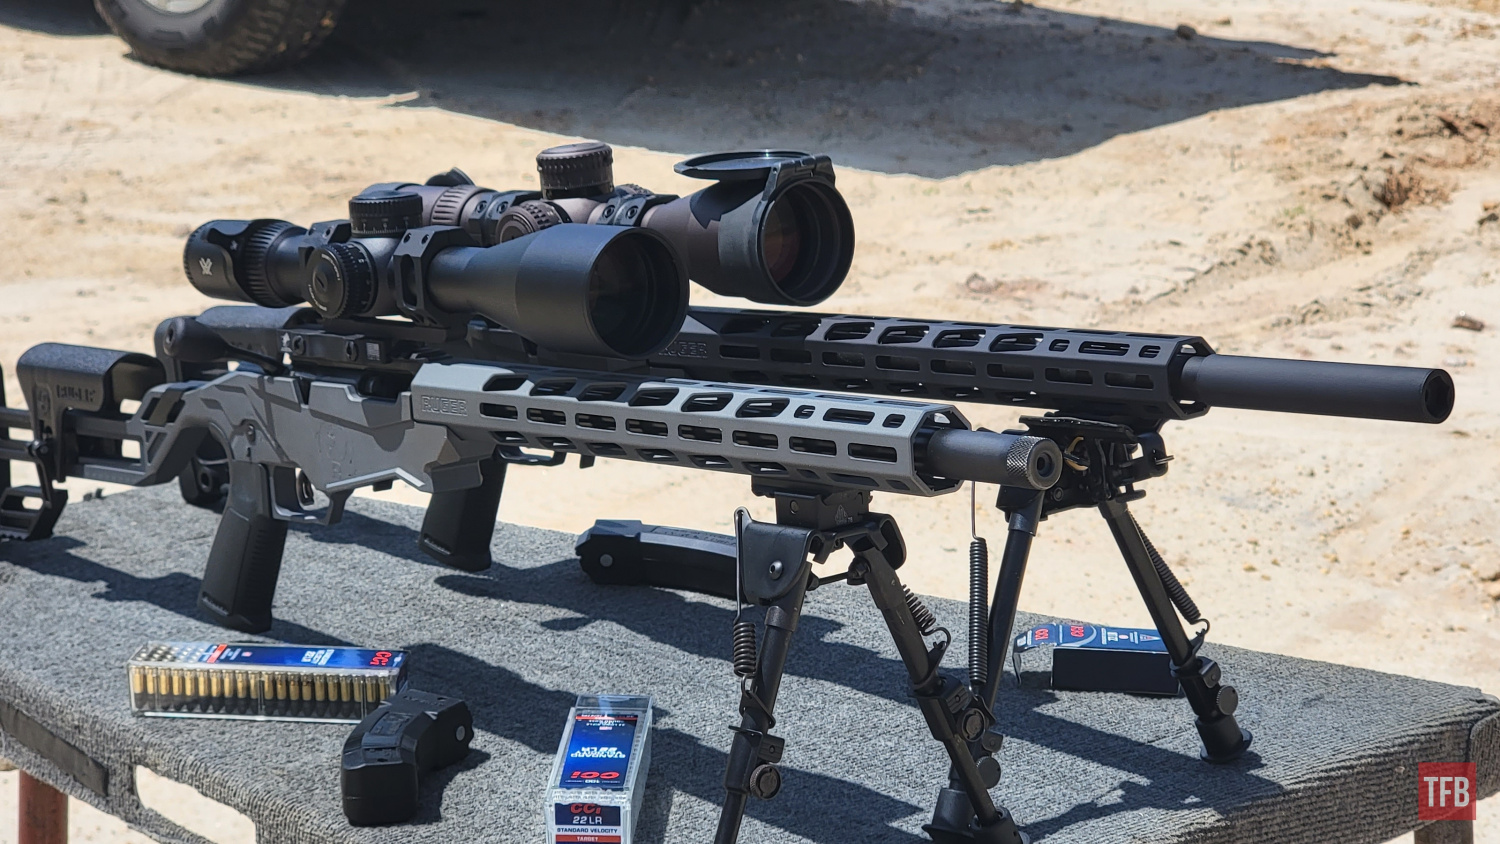 Precise Plinkers - The Best Precision Rimfire Rifles to Compete With